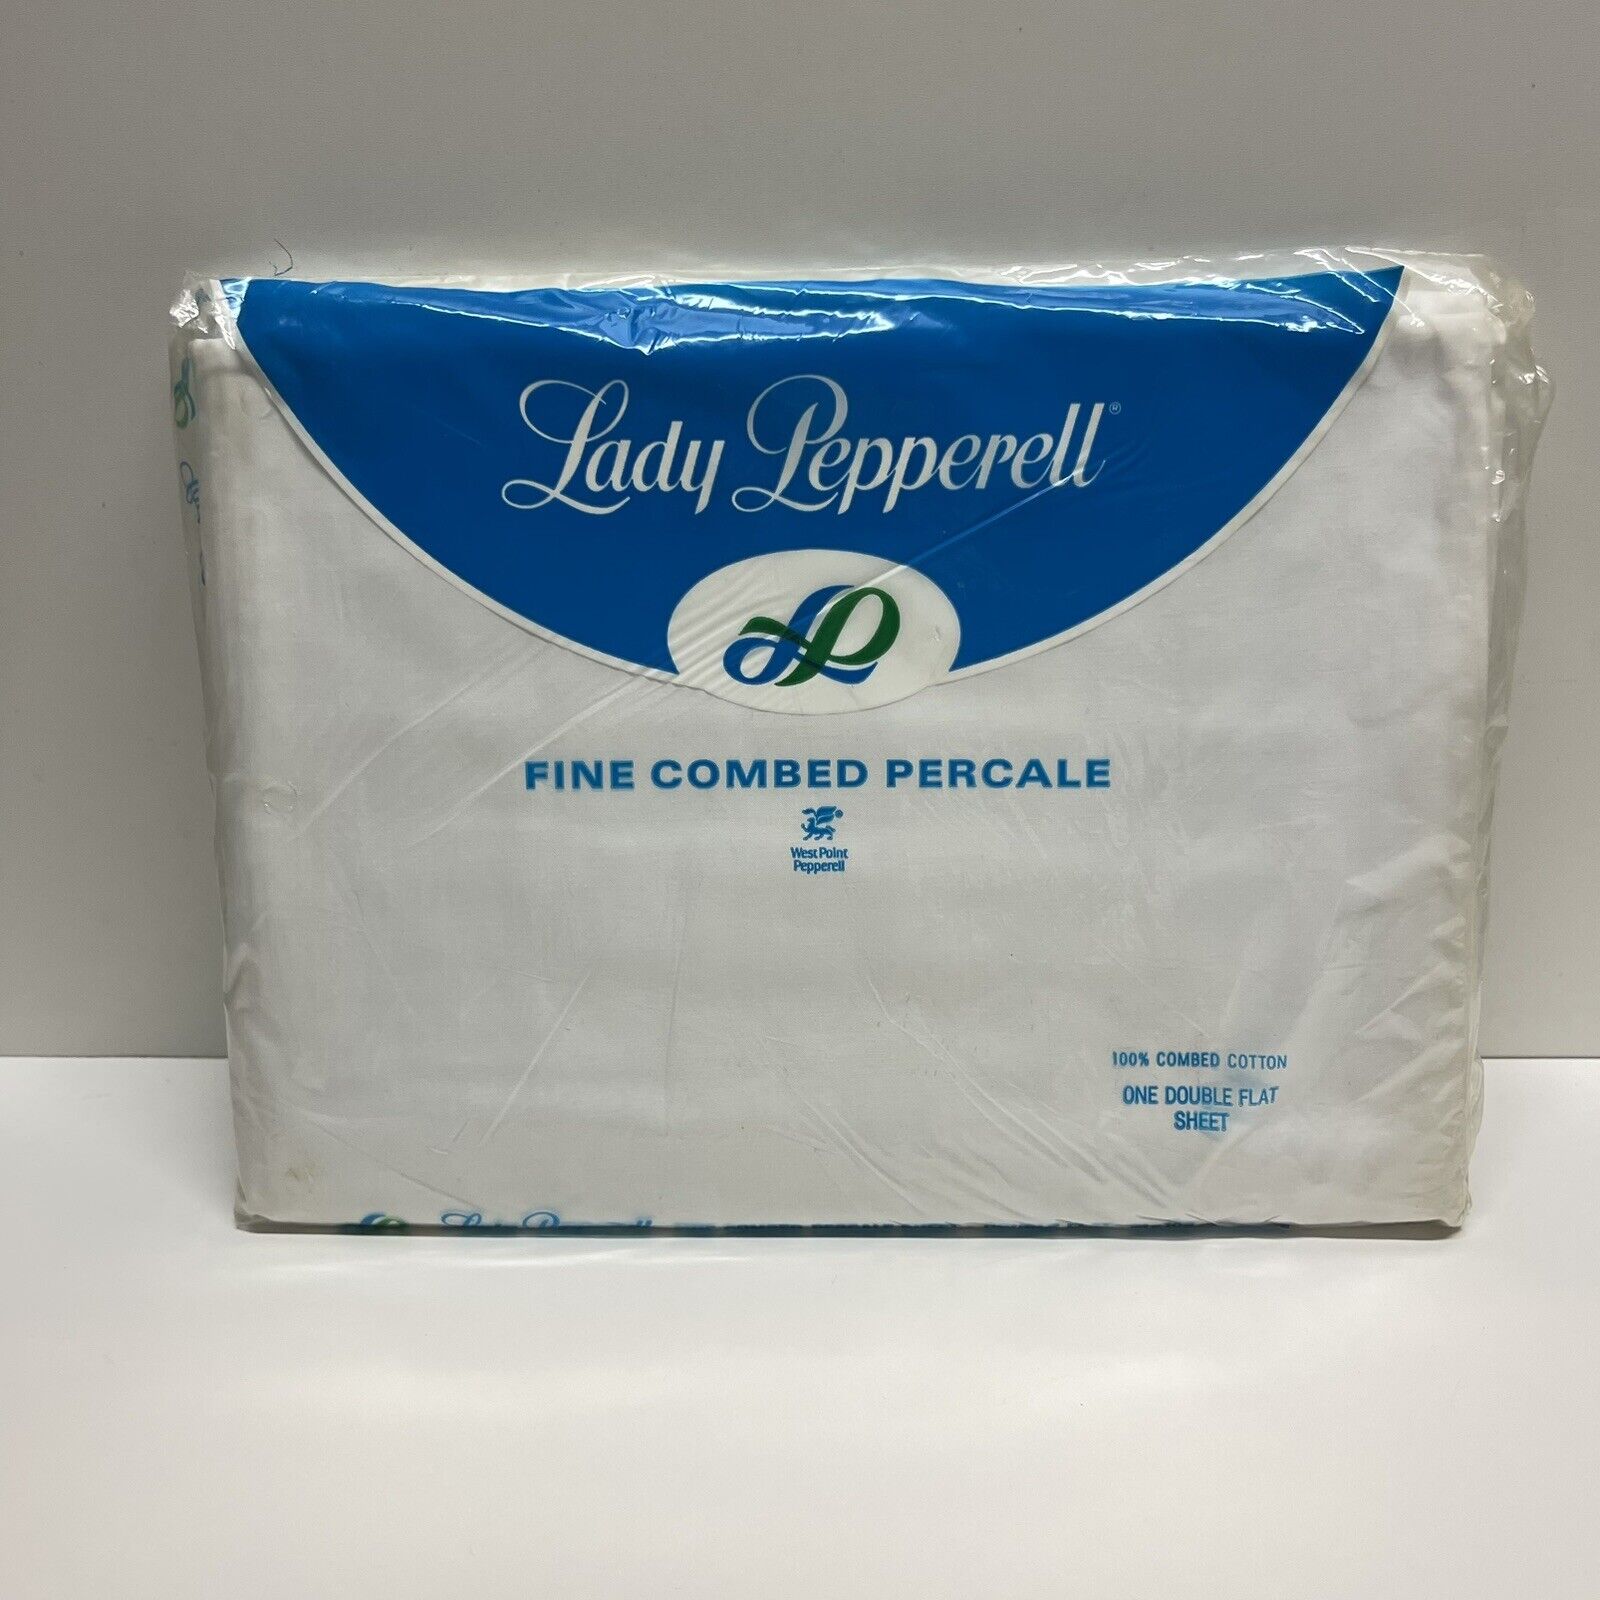 New VTG Lady Pepperell Fine Combed Percale White Double Flat Sheet 81x108 Sealed